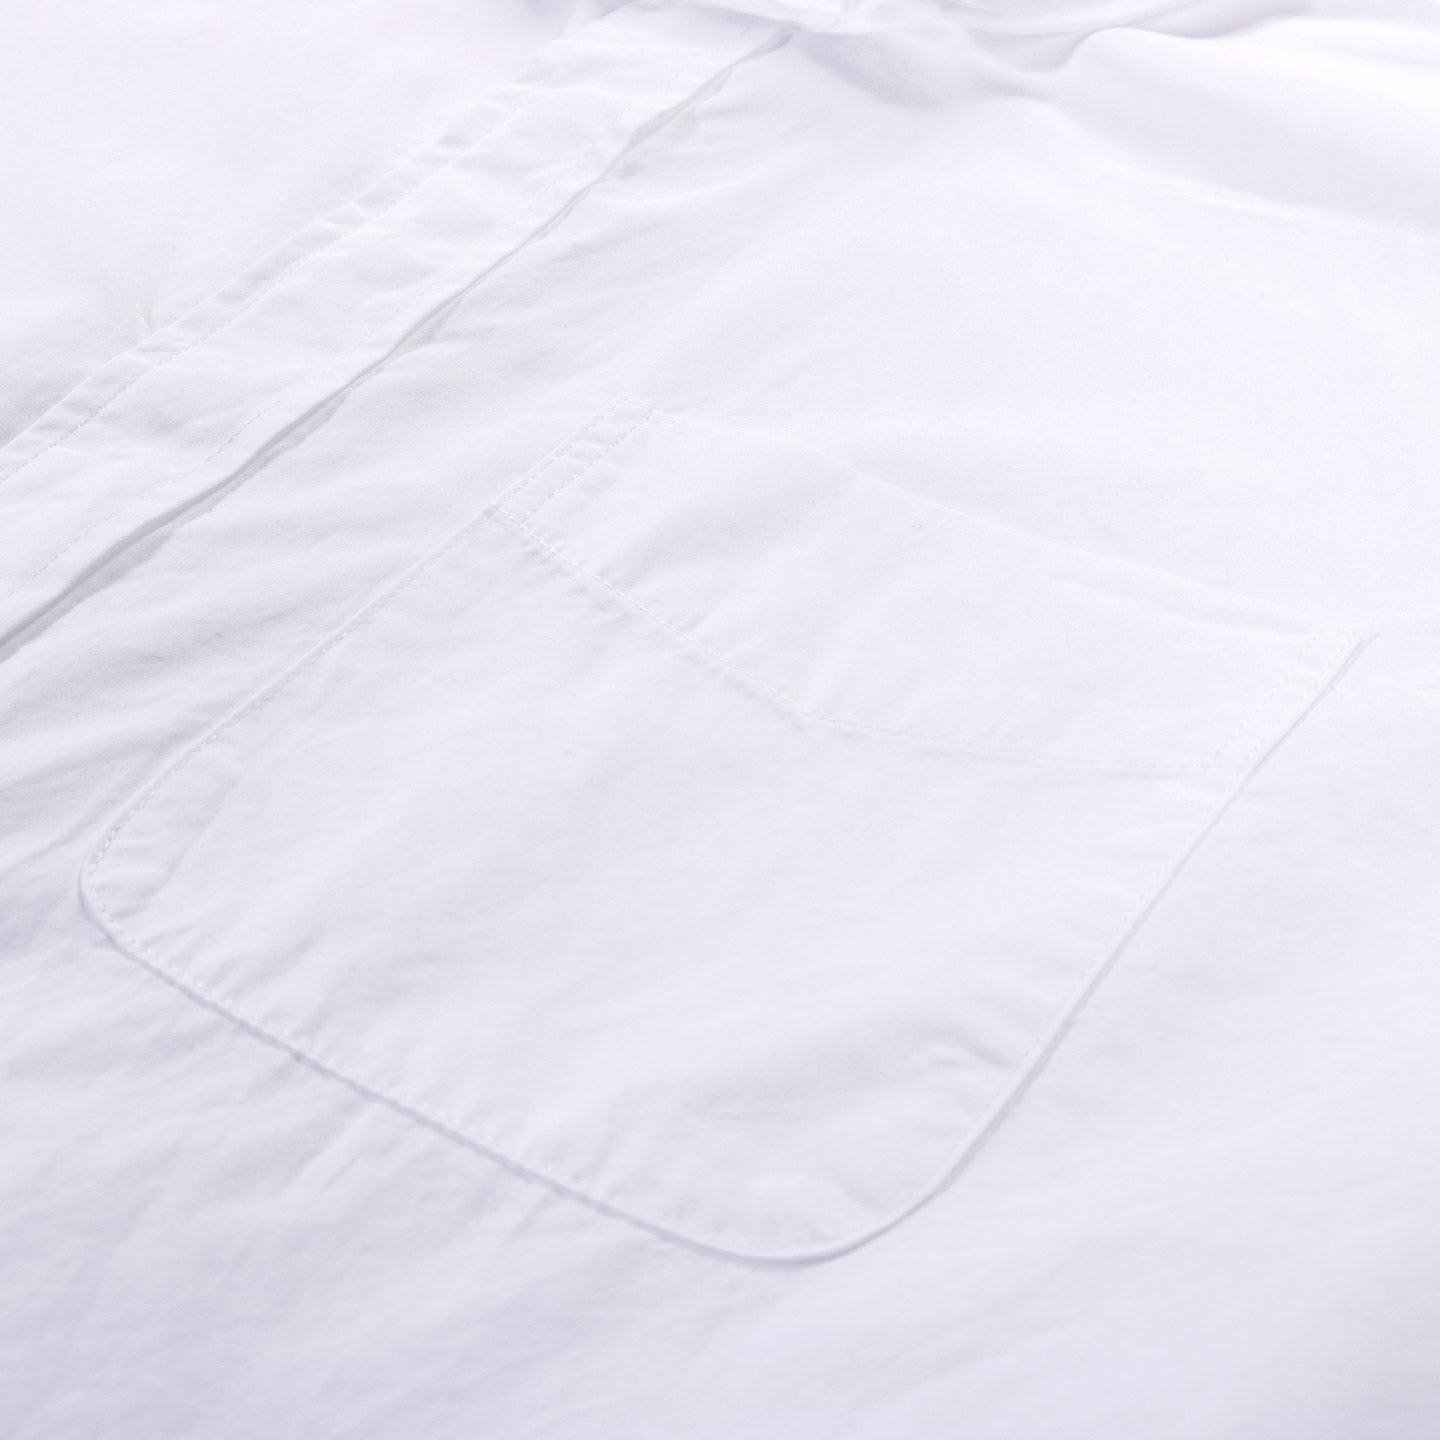 ENGINEERED GARMENTS ROUNDED COLLAR SHIRT WHITE BROADCLOTH